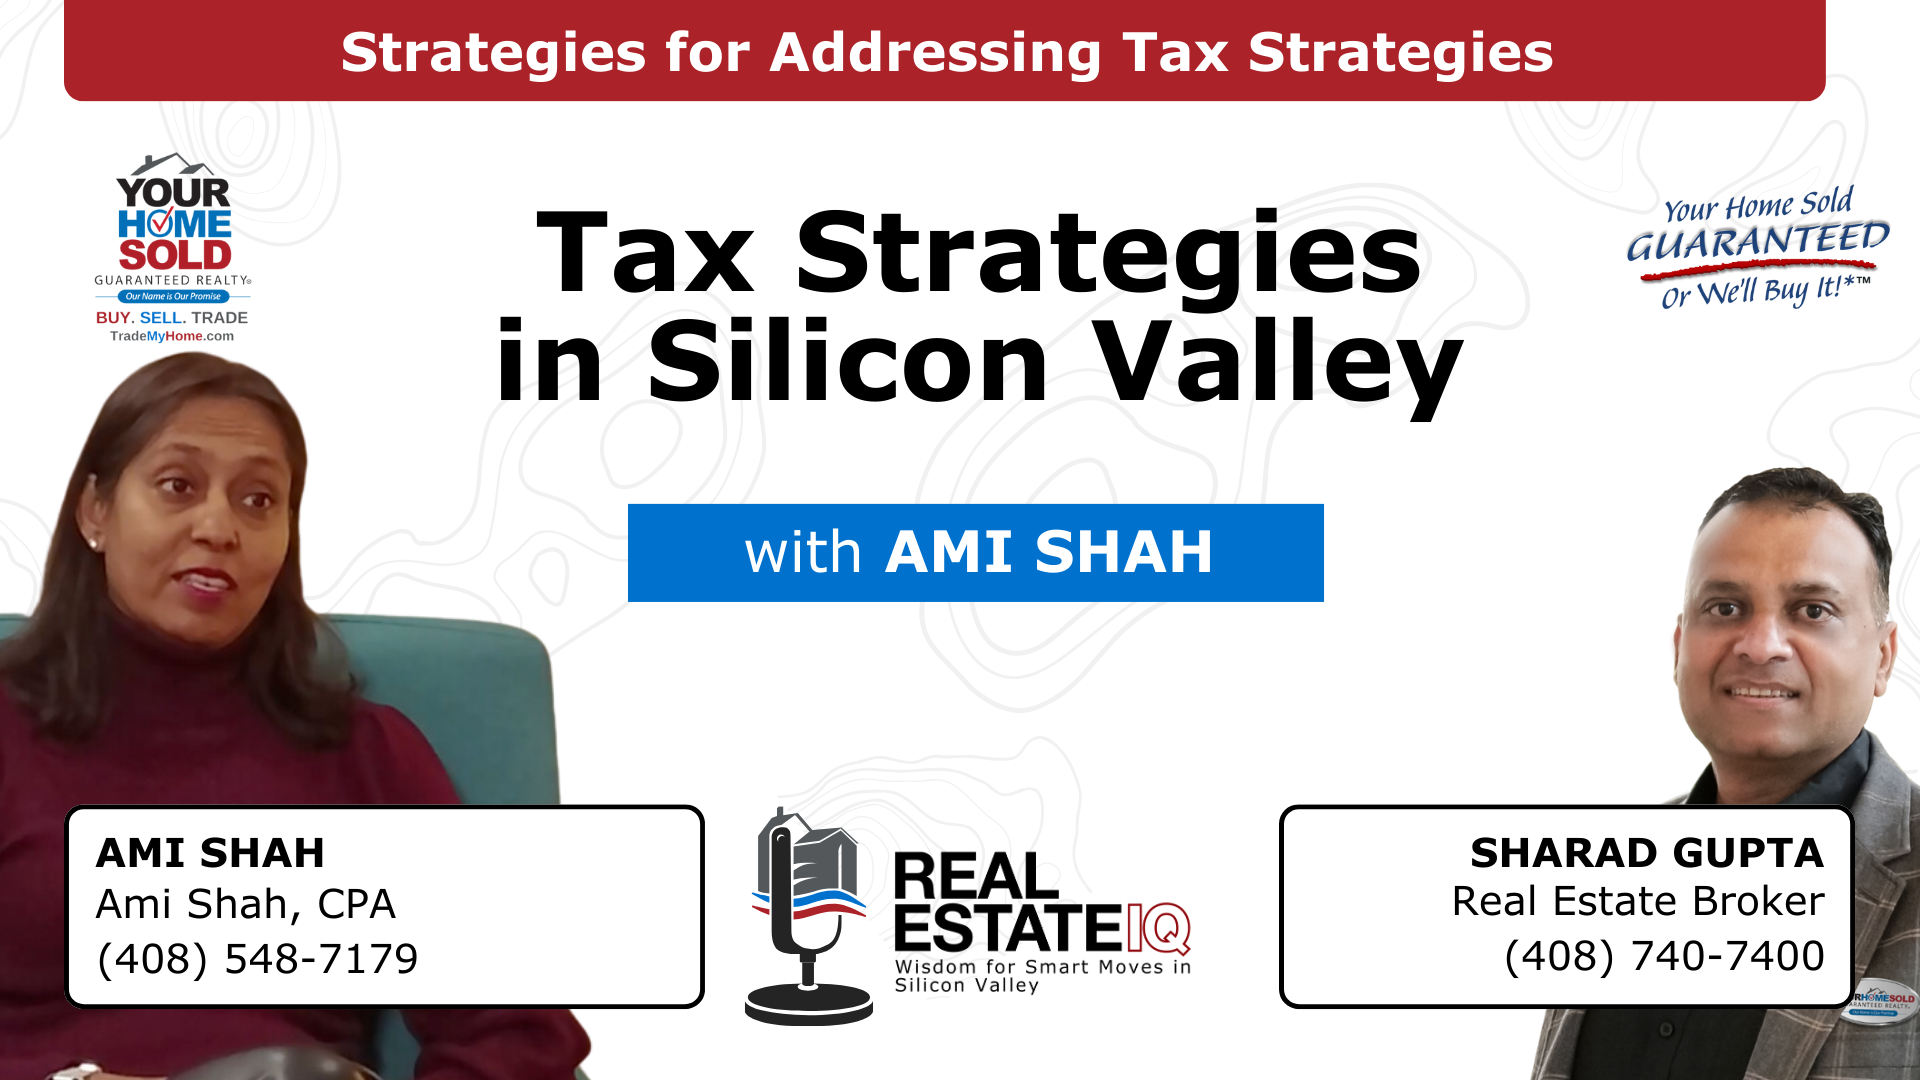 Tax Strategies: Addressing Silicon Valley’s Tax Challenges and Strategies